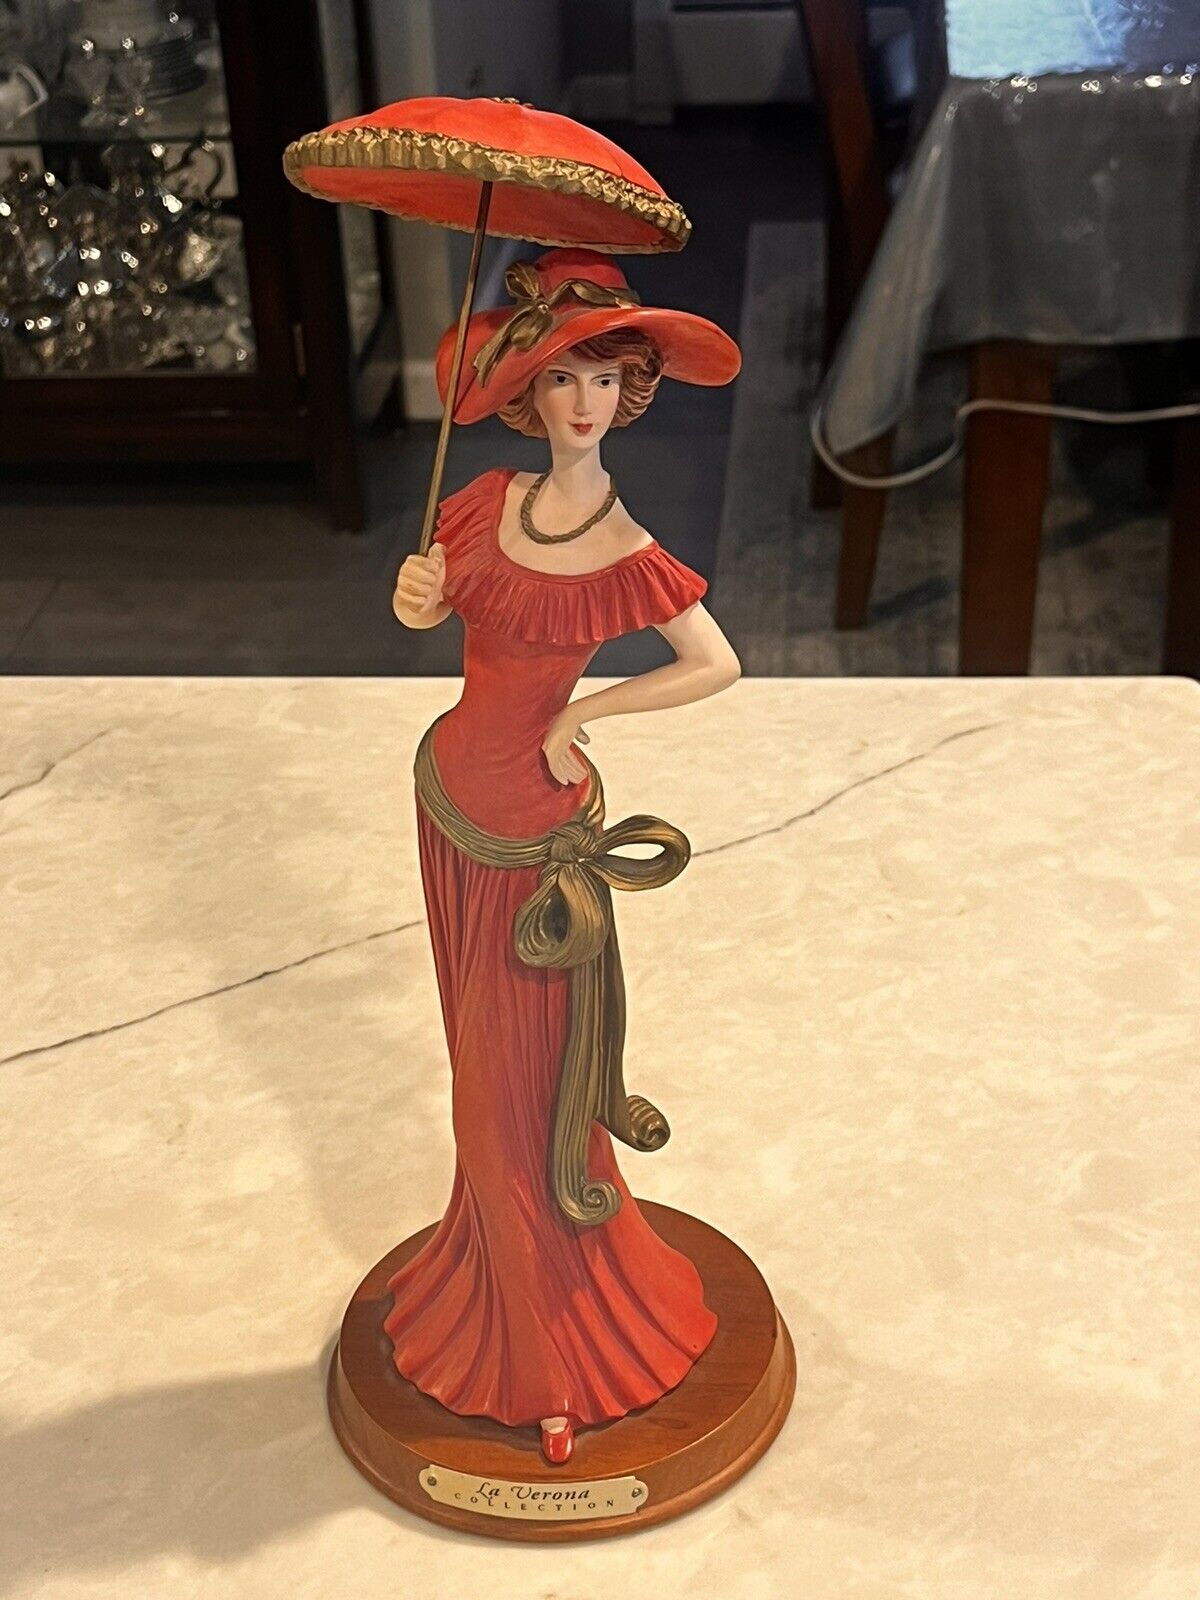 La Verona Collection Lady in Red 13” Figurine With Parasol EXCELLENT CONDITION